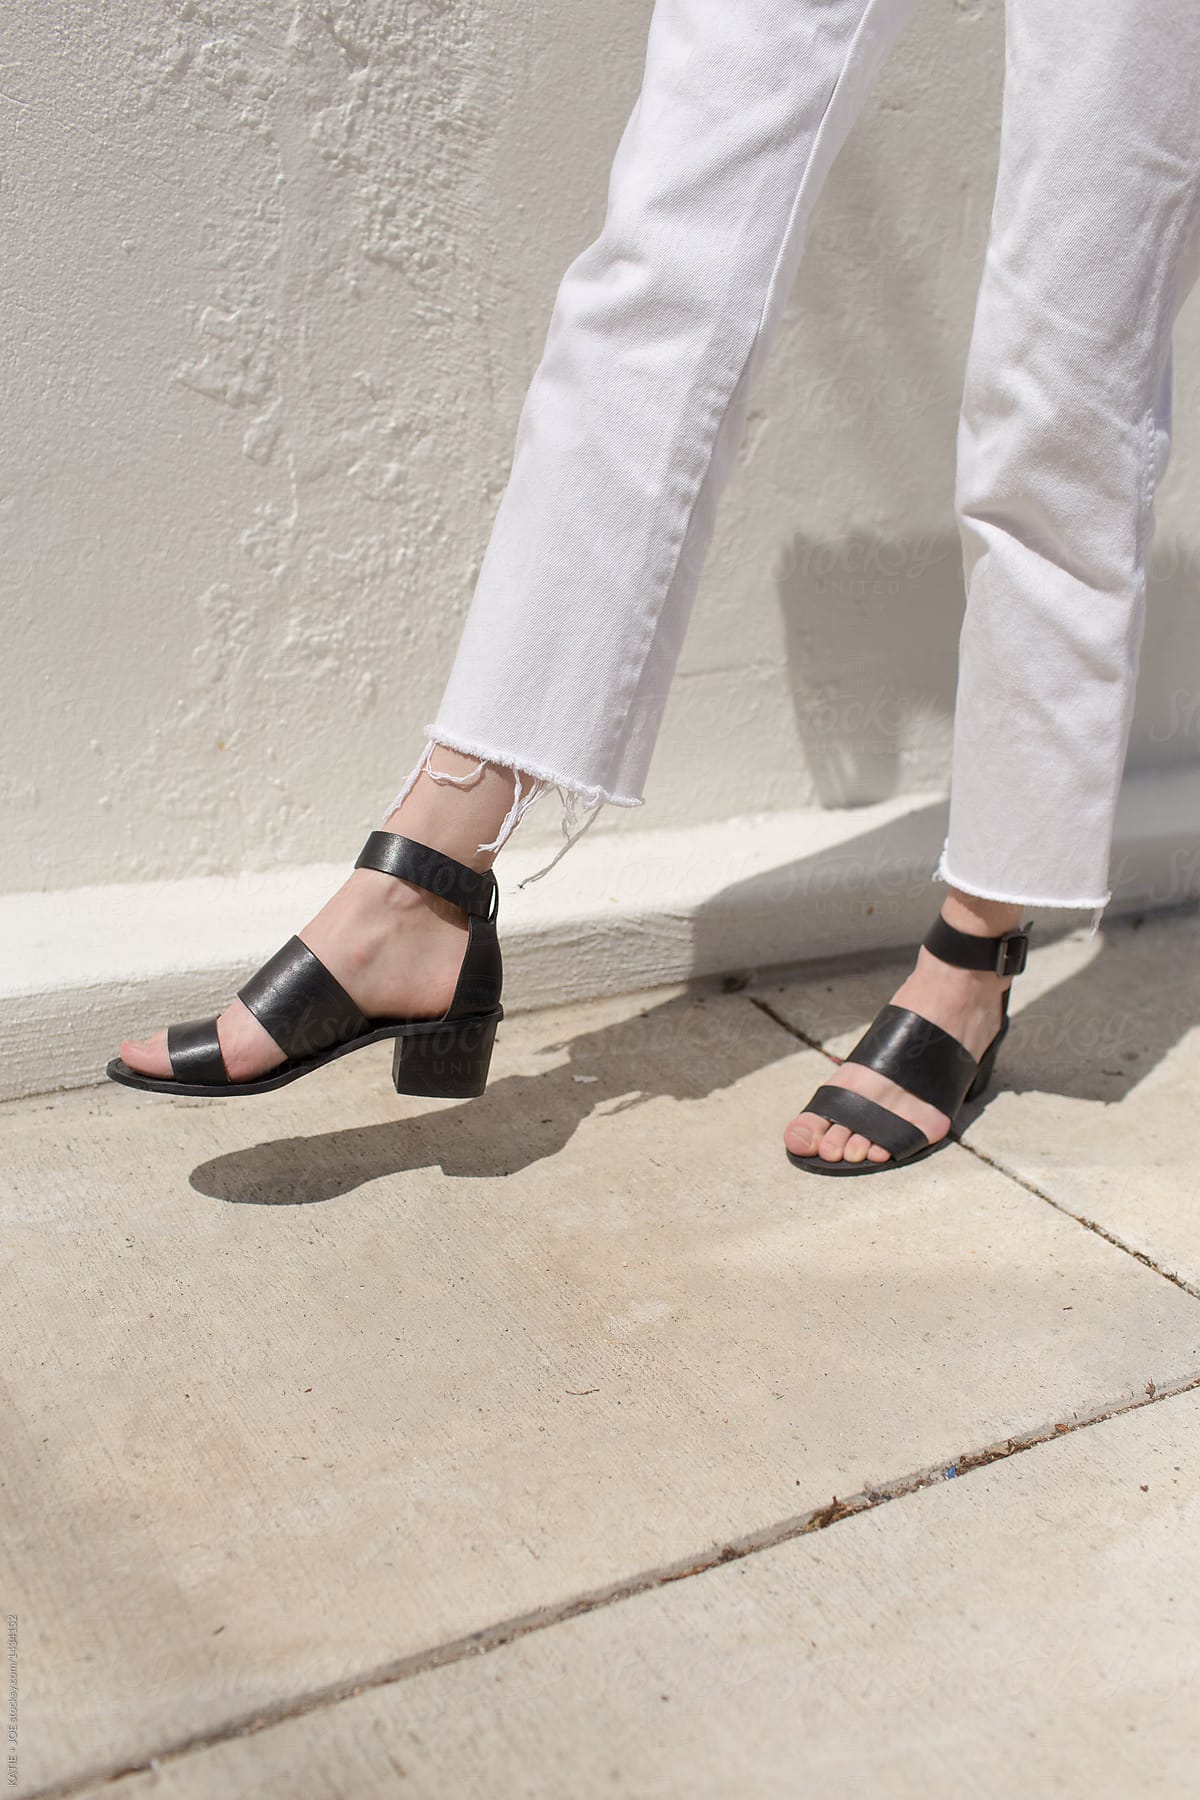 woman\'s legs taking a step on a sidewalk wearing white pants and black sandals